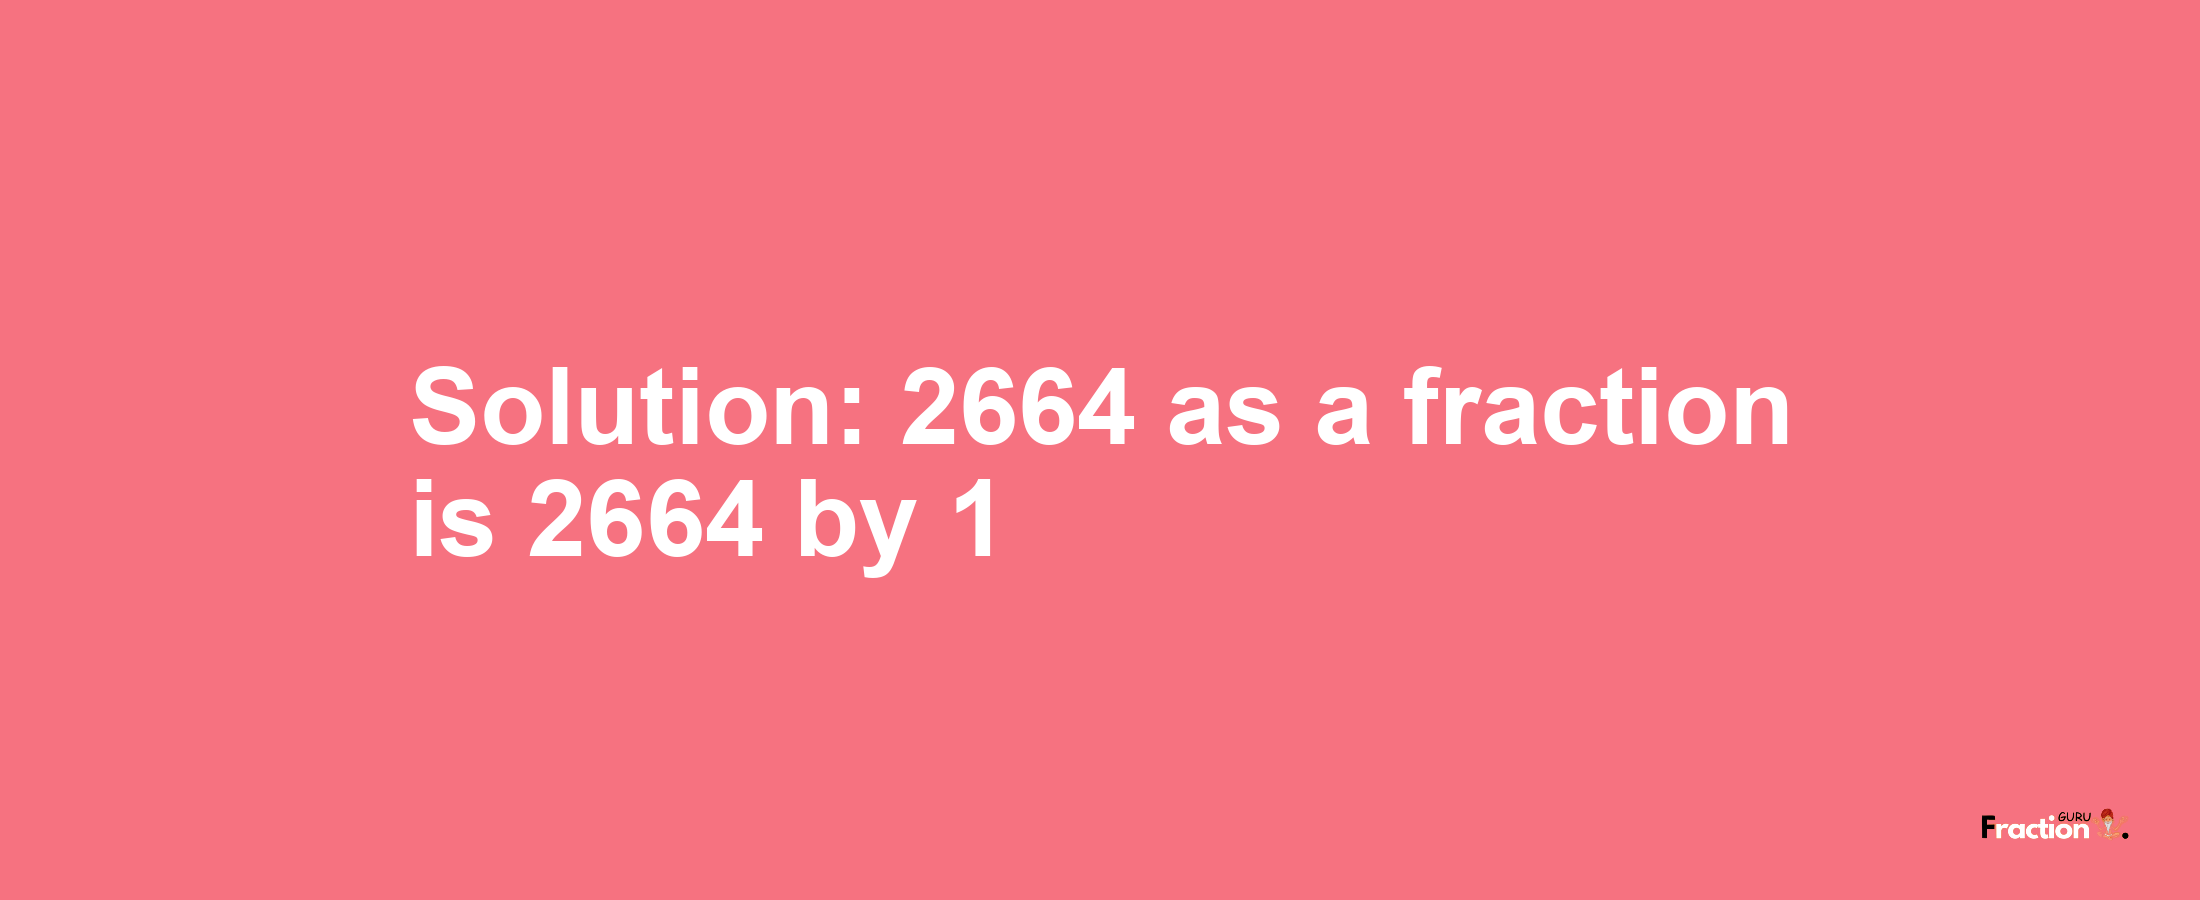 Solution:2664 as a fraction is 2664/1